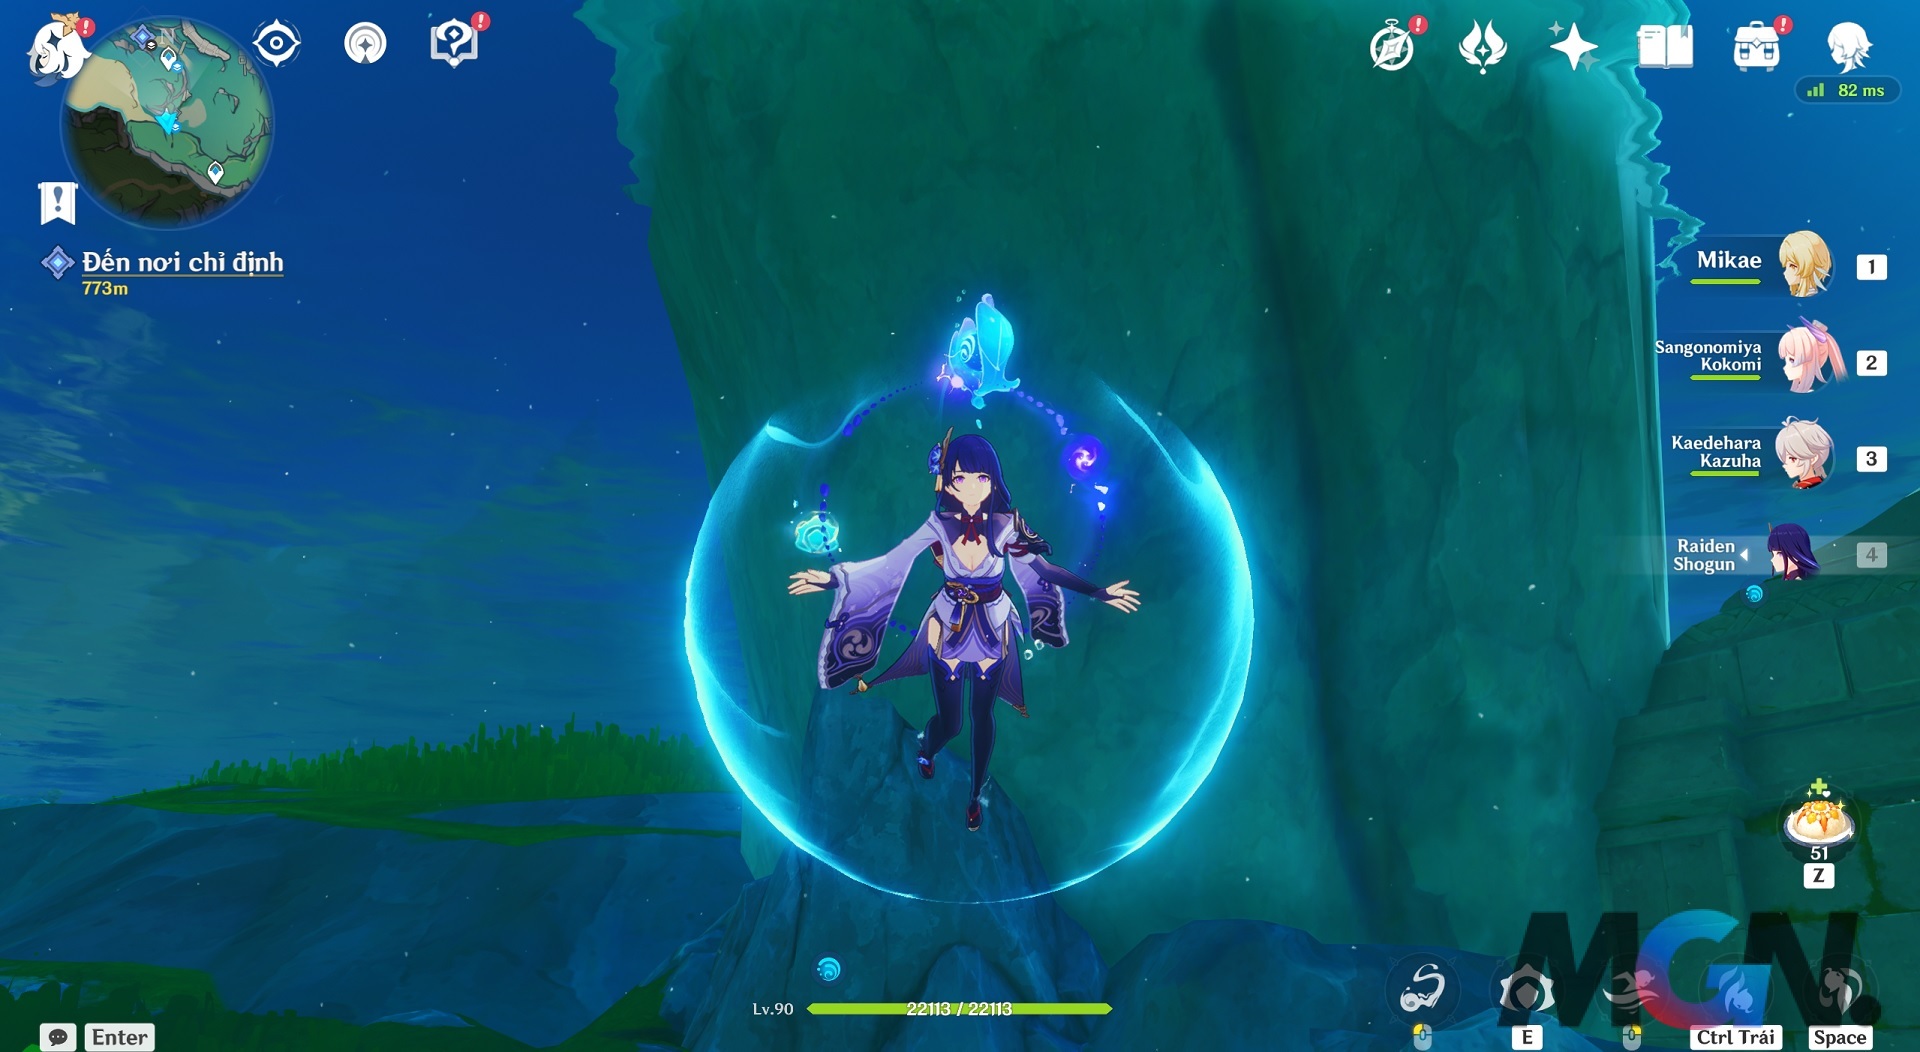 The 26th Water Spirit Child will be in a slightly hidden position